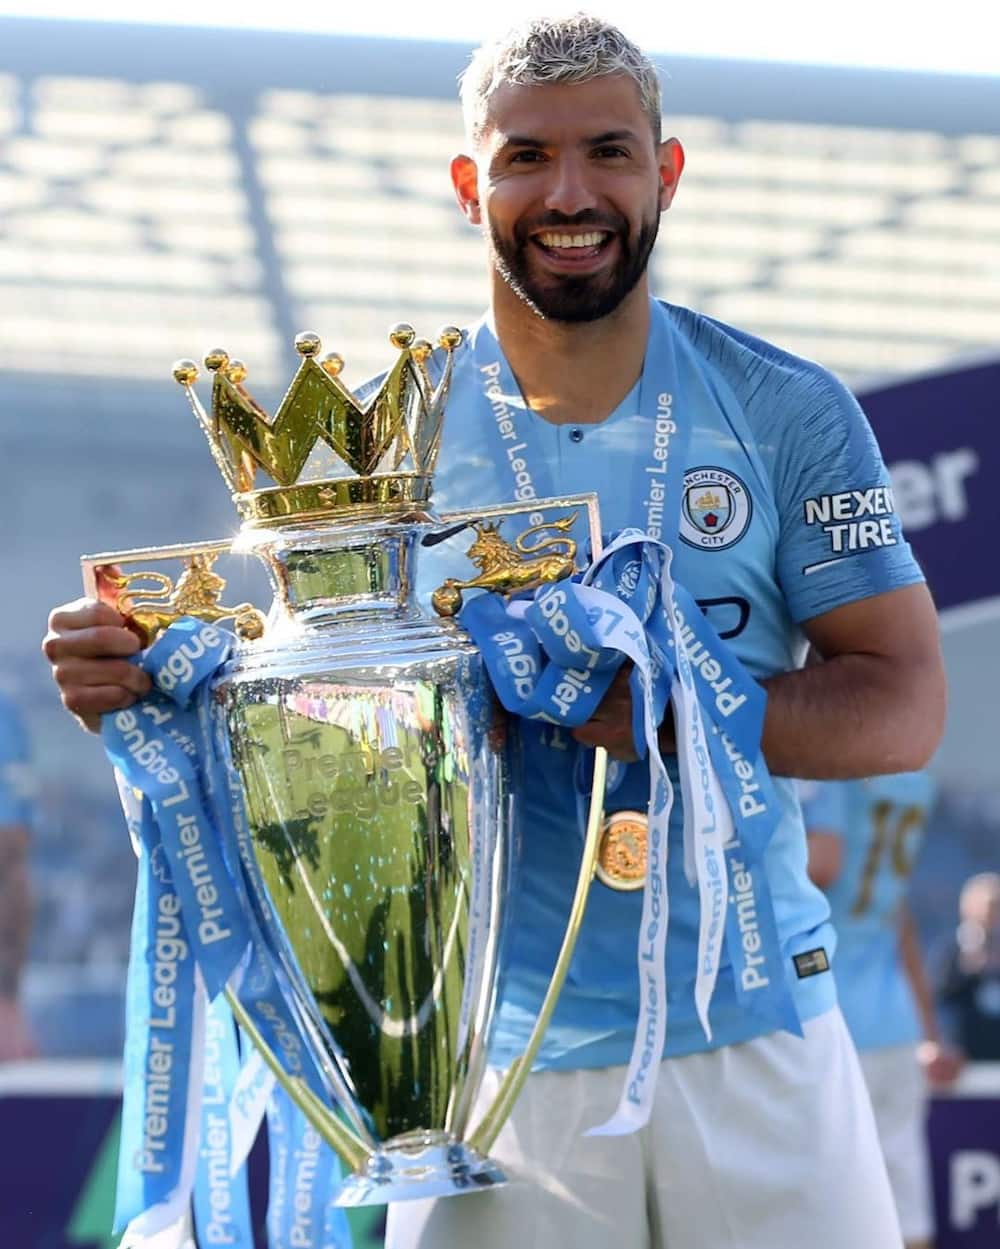 Where is Sergio Aguero playing now?